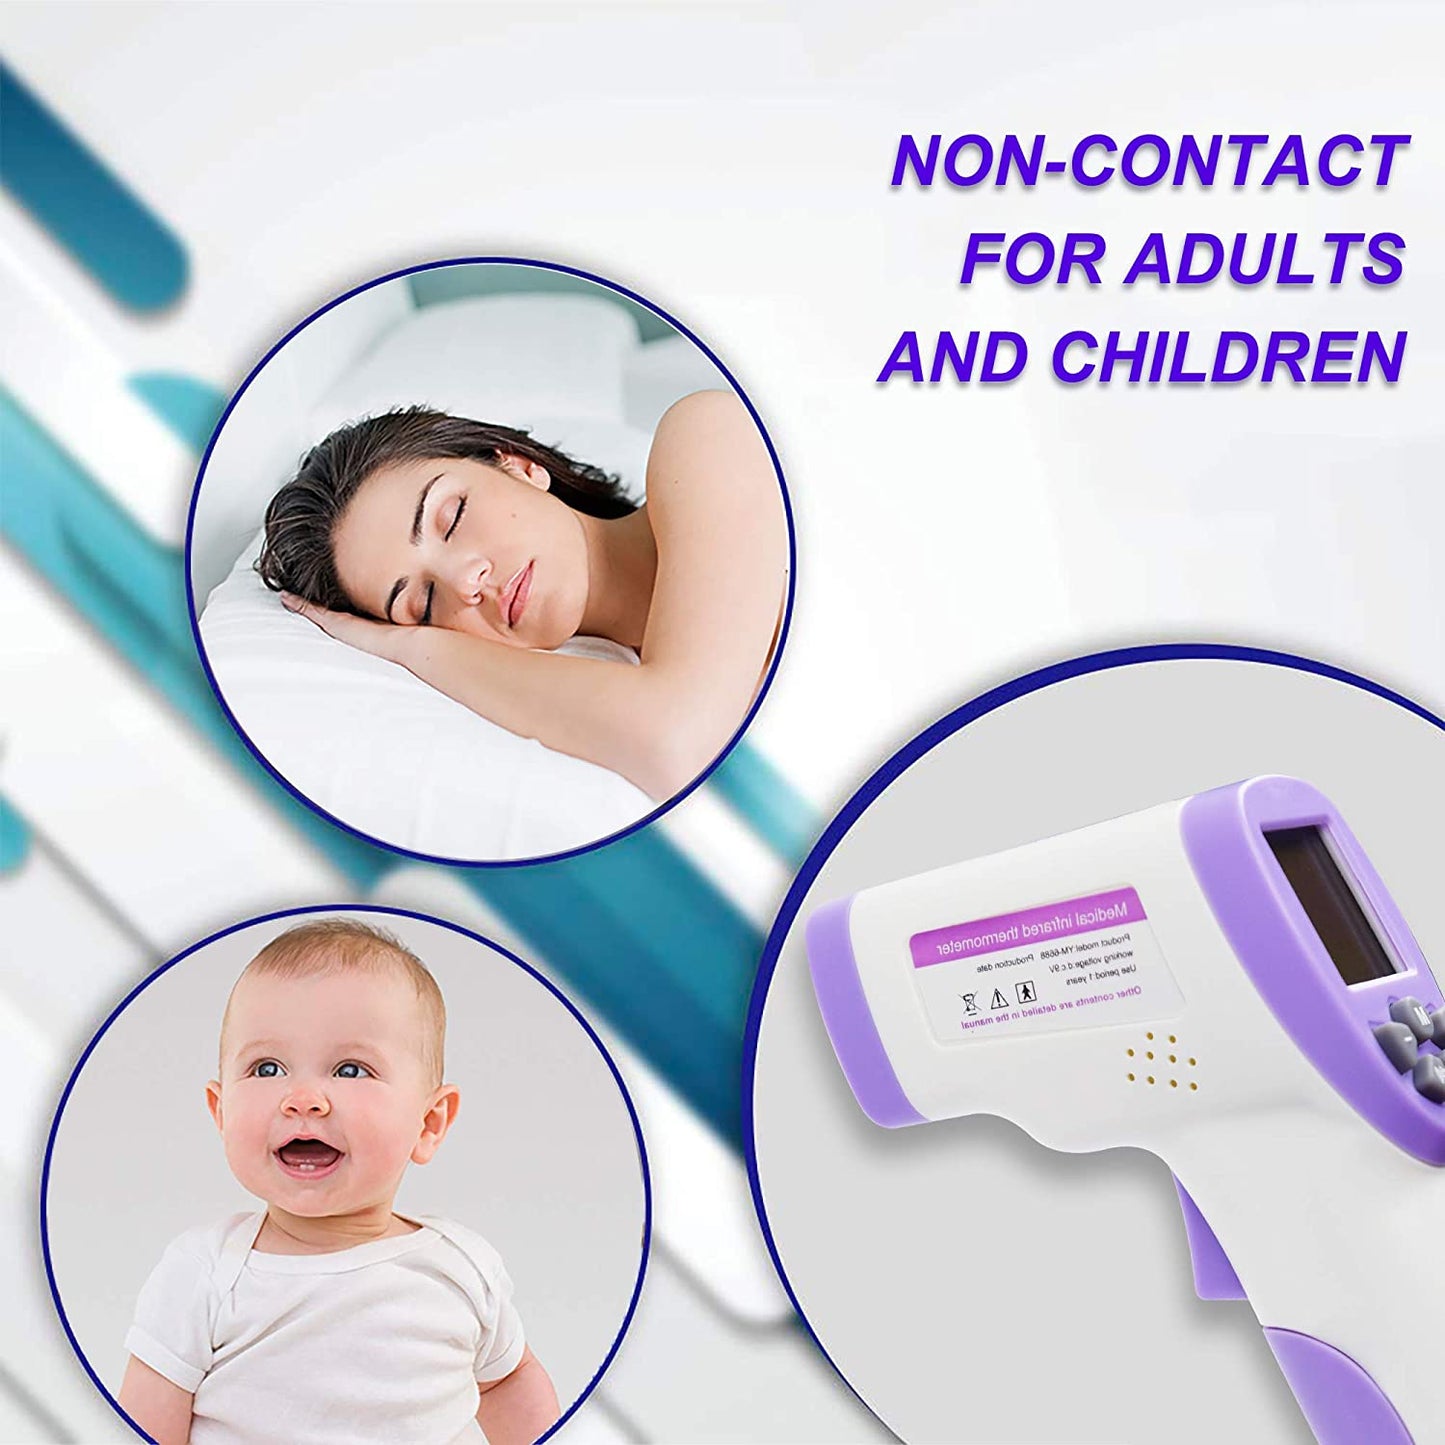 Digital Termomete Infrared Forehead Body Thermometer Gun Non-contact Temperature Measurement Device with Real-time Accurate Readings